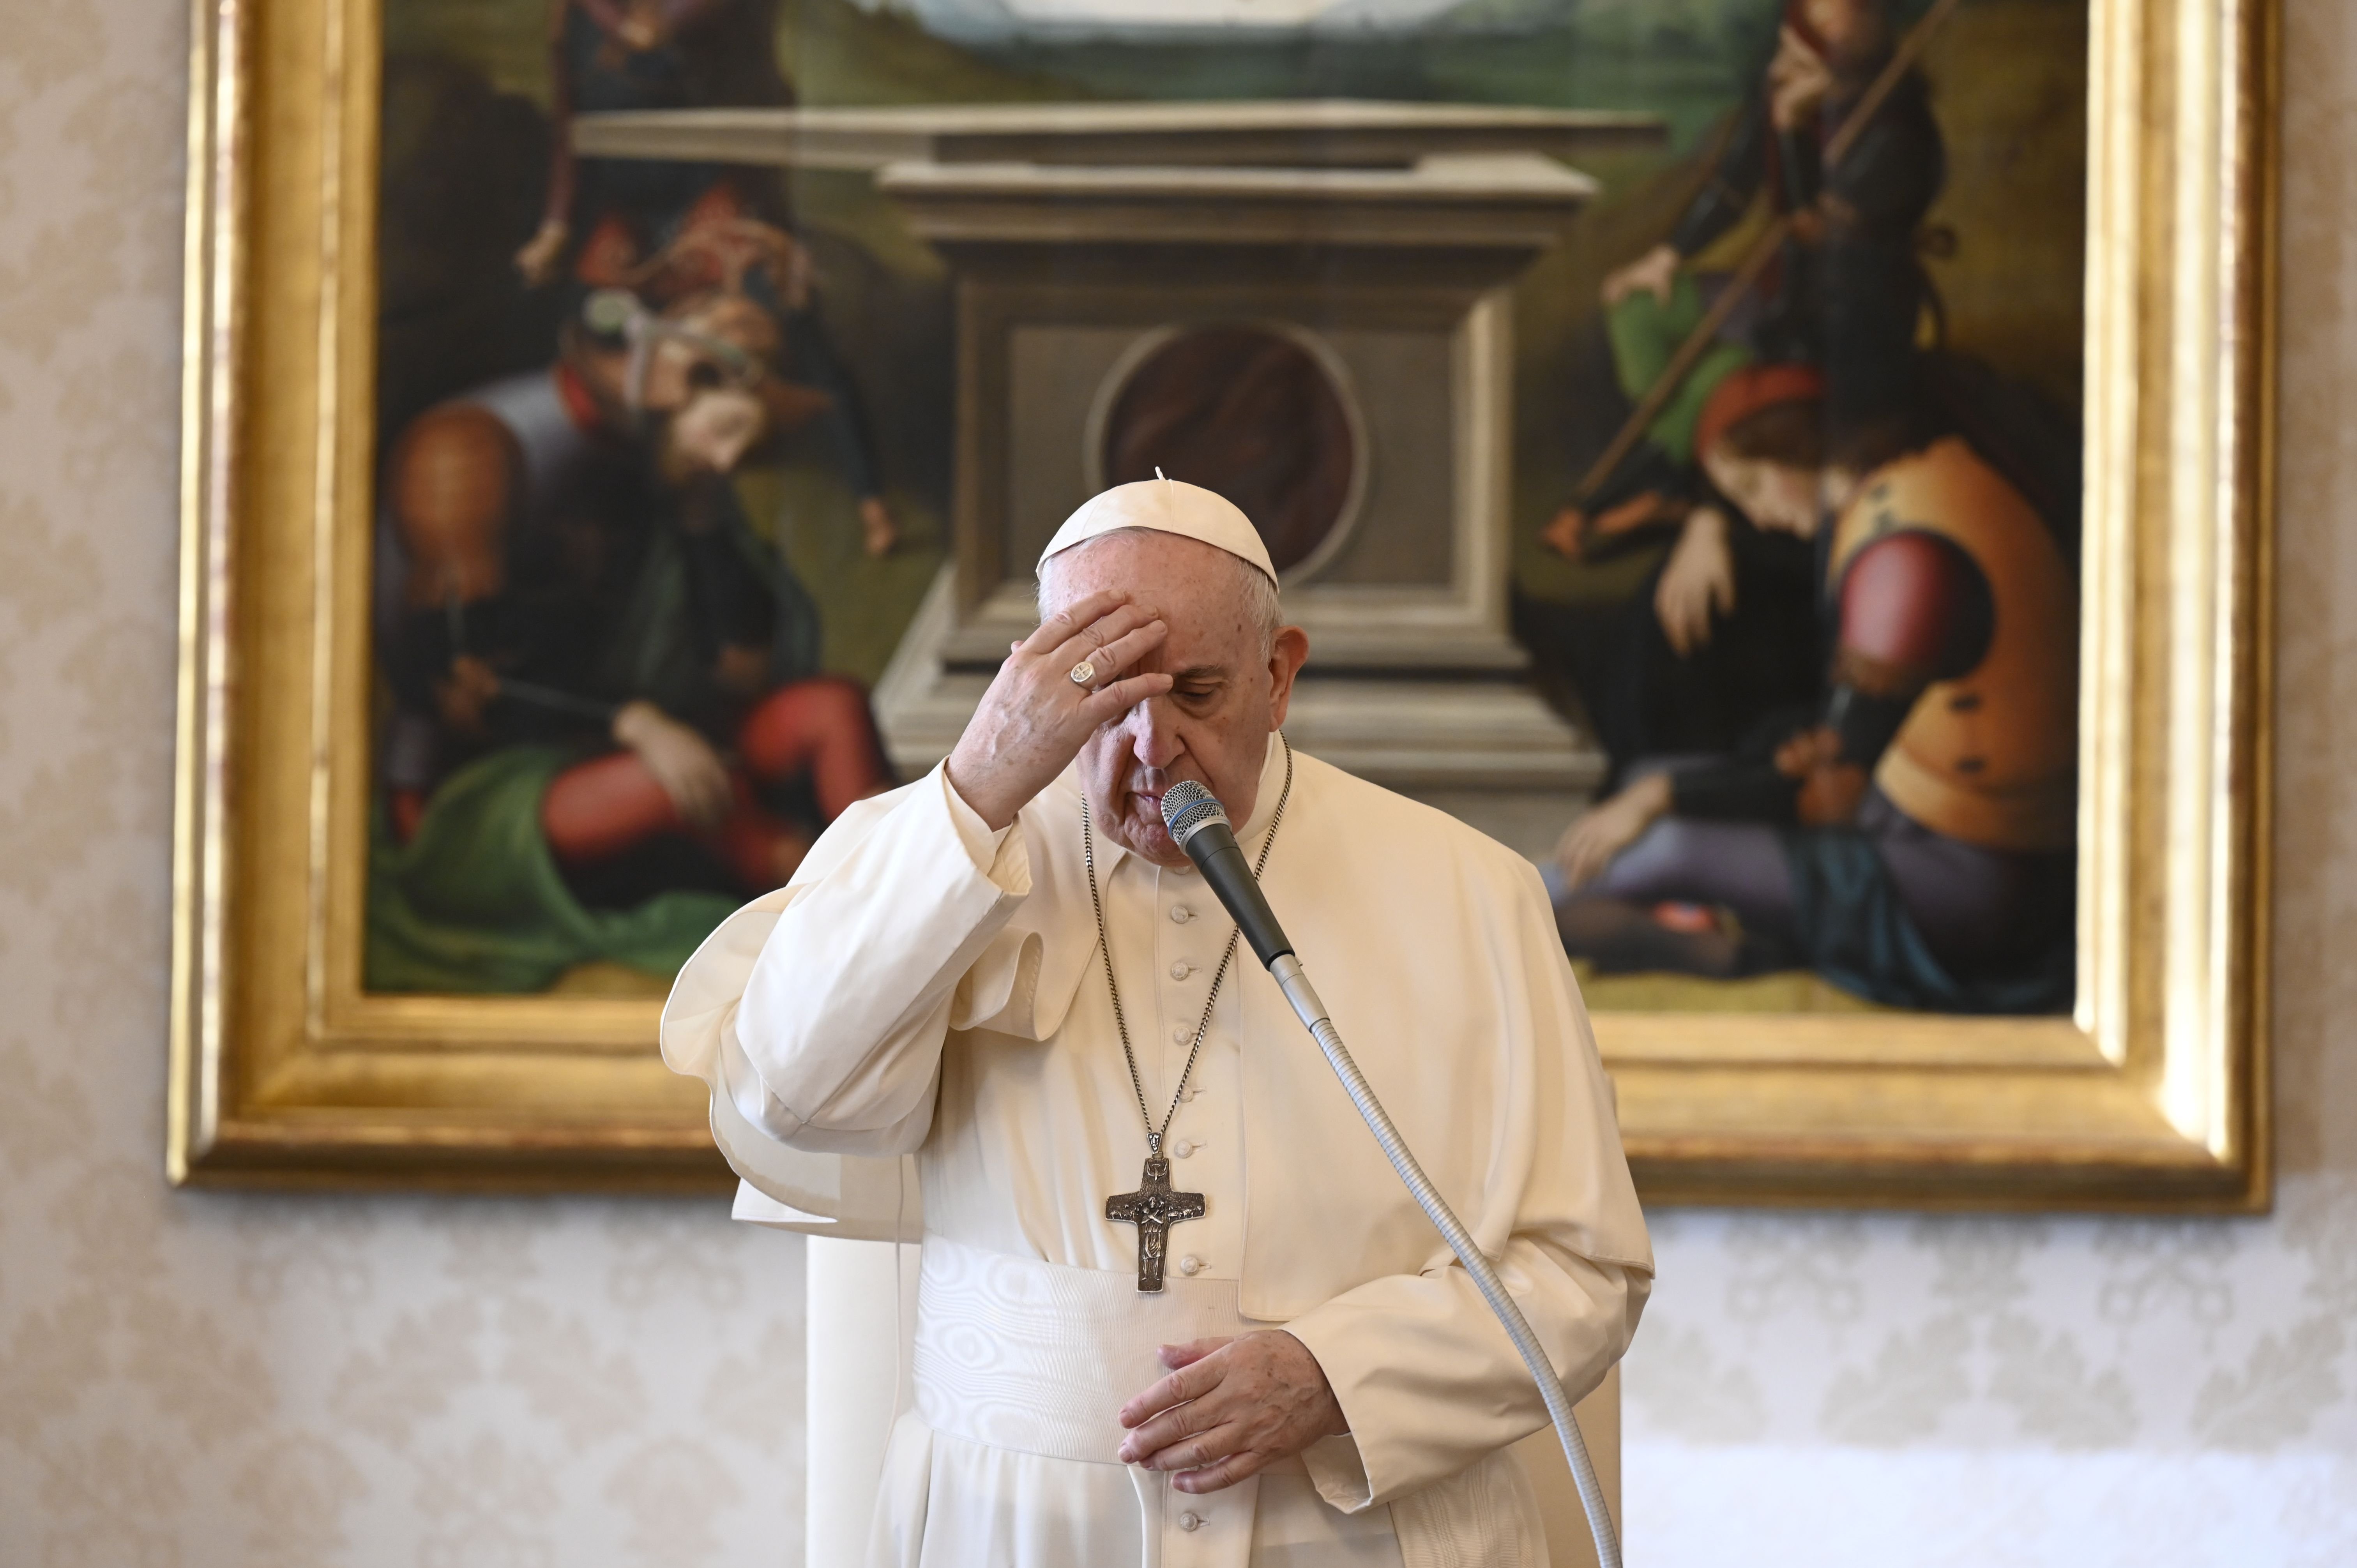 Read Pope Francis’ May prayer to Mary for the end of the pandemic